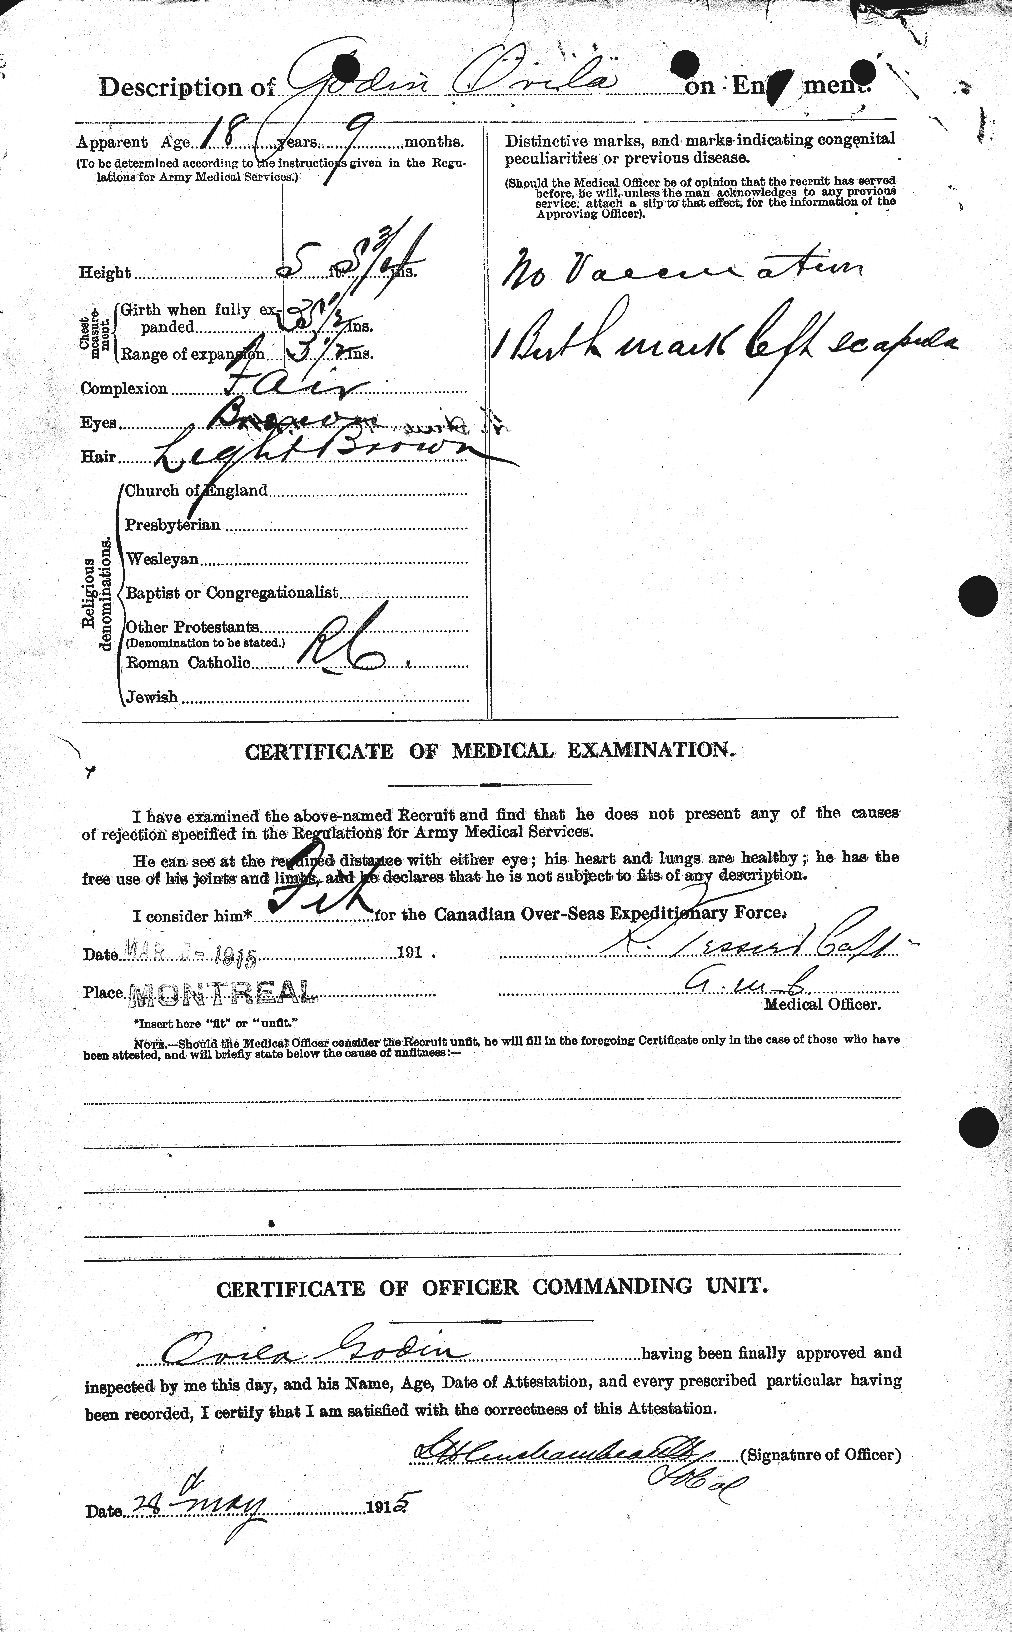 Personnel Records of the First World War - CEF 354562b